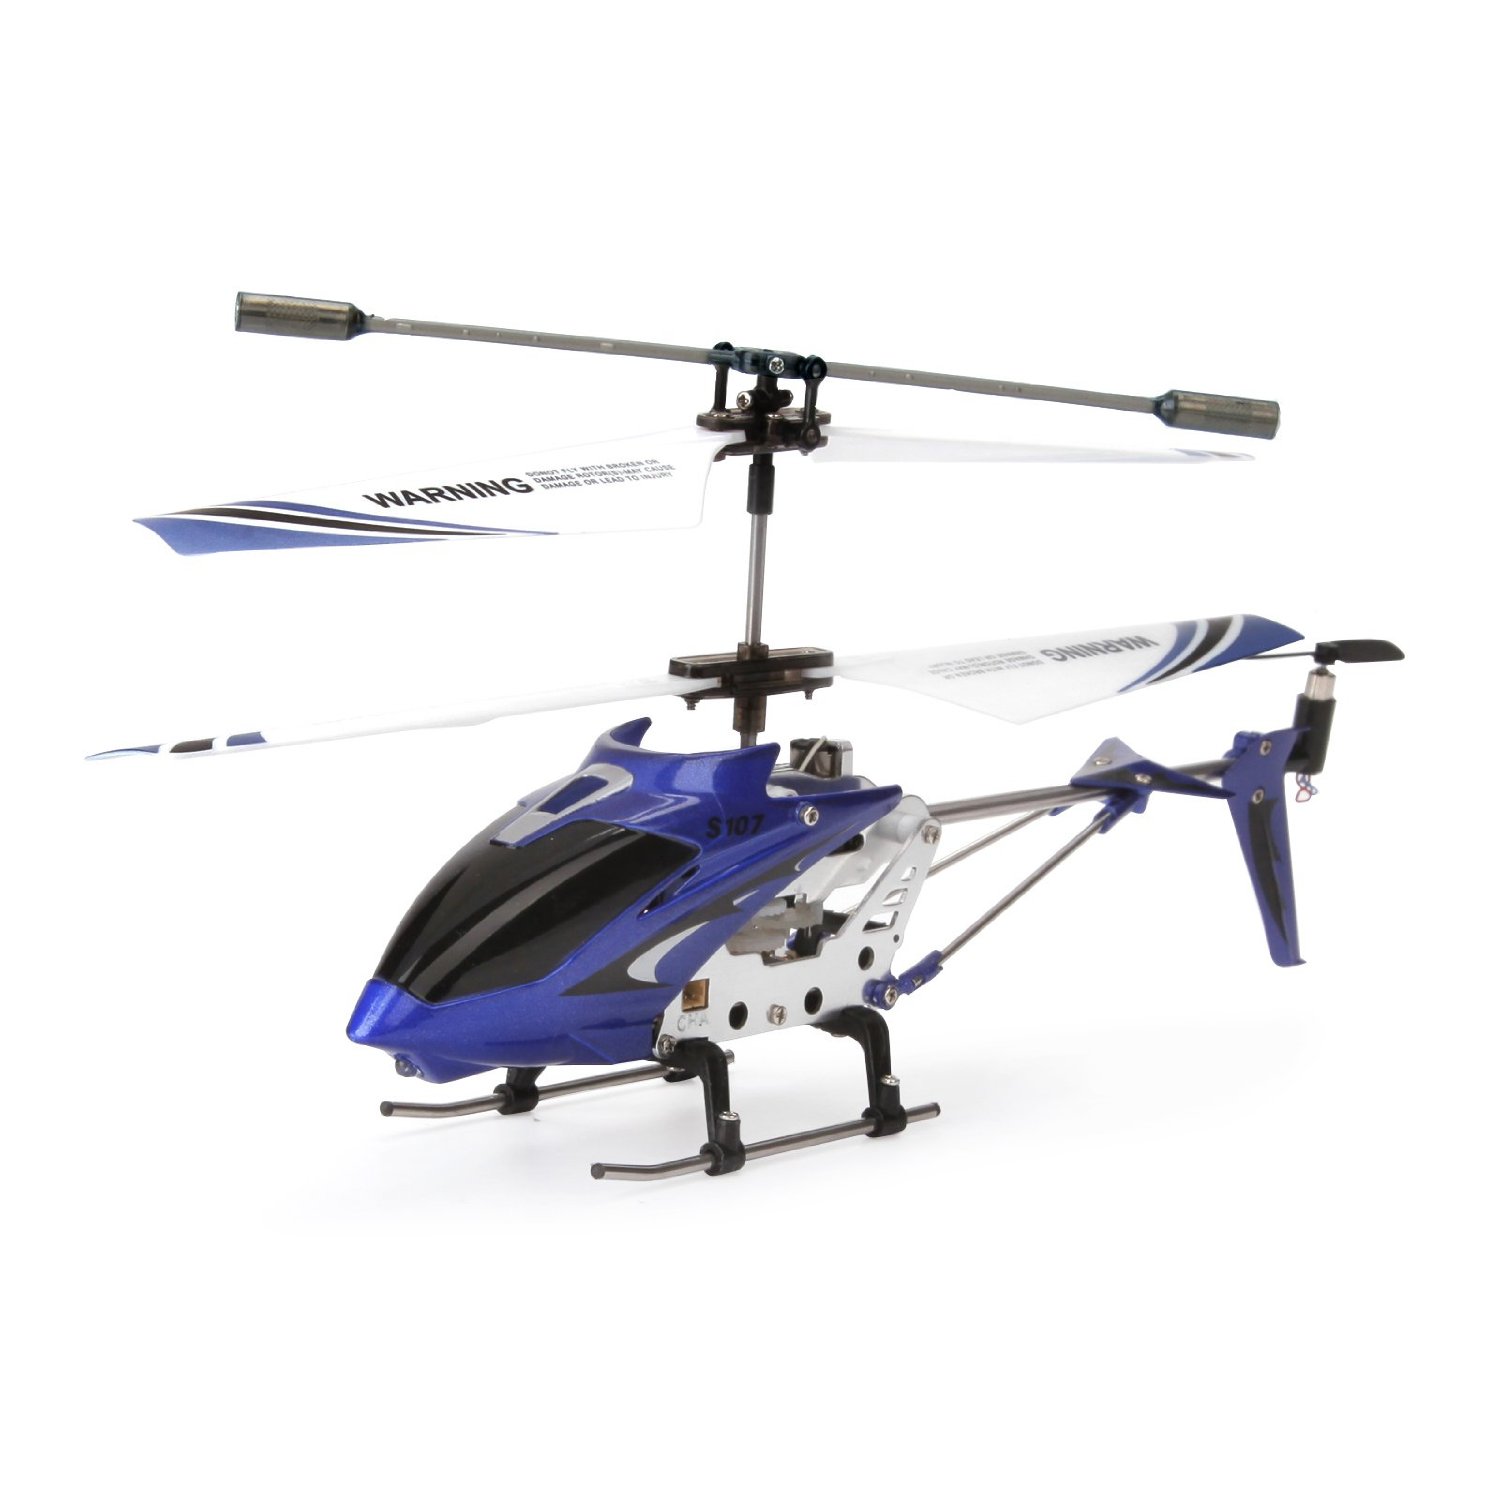 Choose from Best RC Helicopter brands